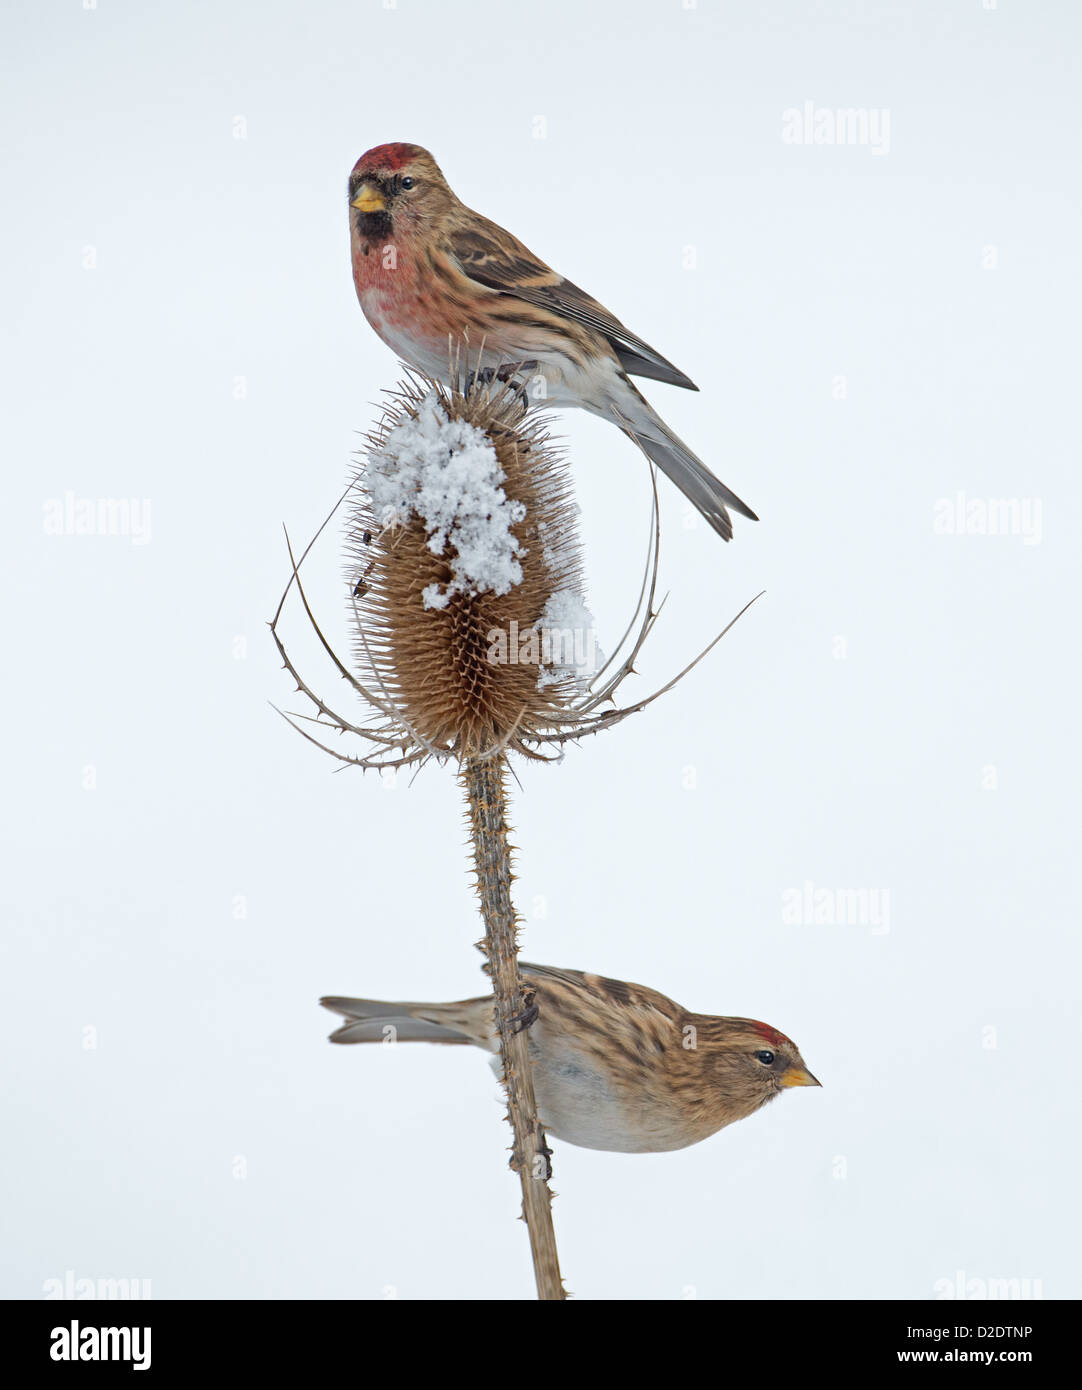 Male And Female Lesser Redpoll (Carduelis cabaret) Perched On Snow Covered Teasel (Dipsacus fullonum) Winter. Uk Stock Photo